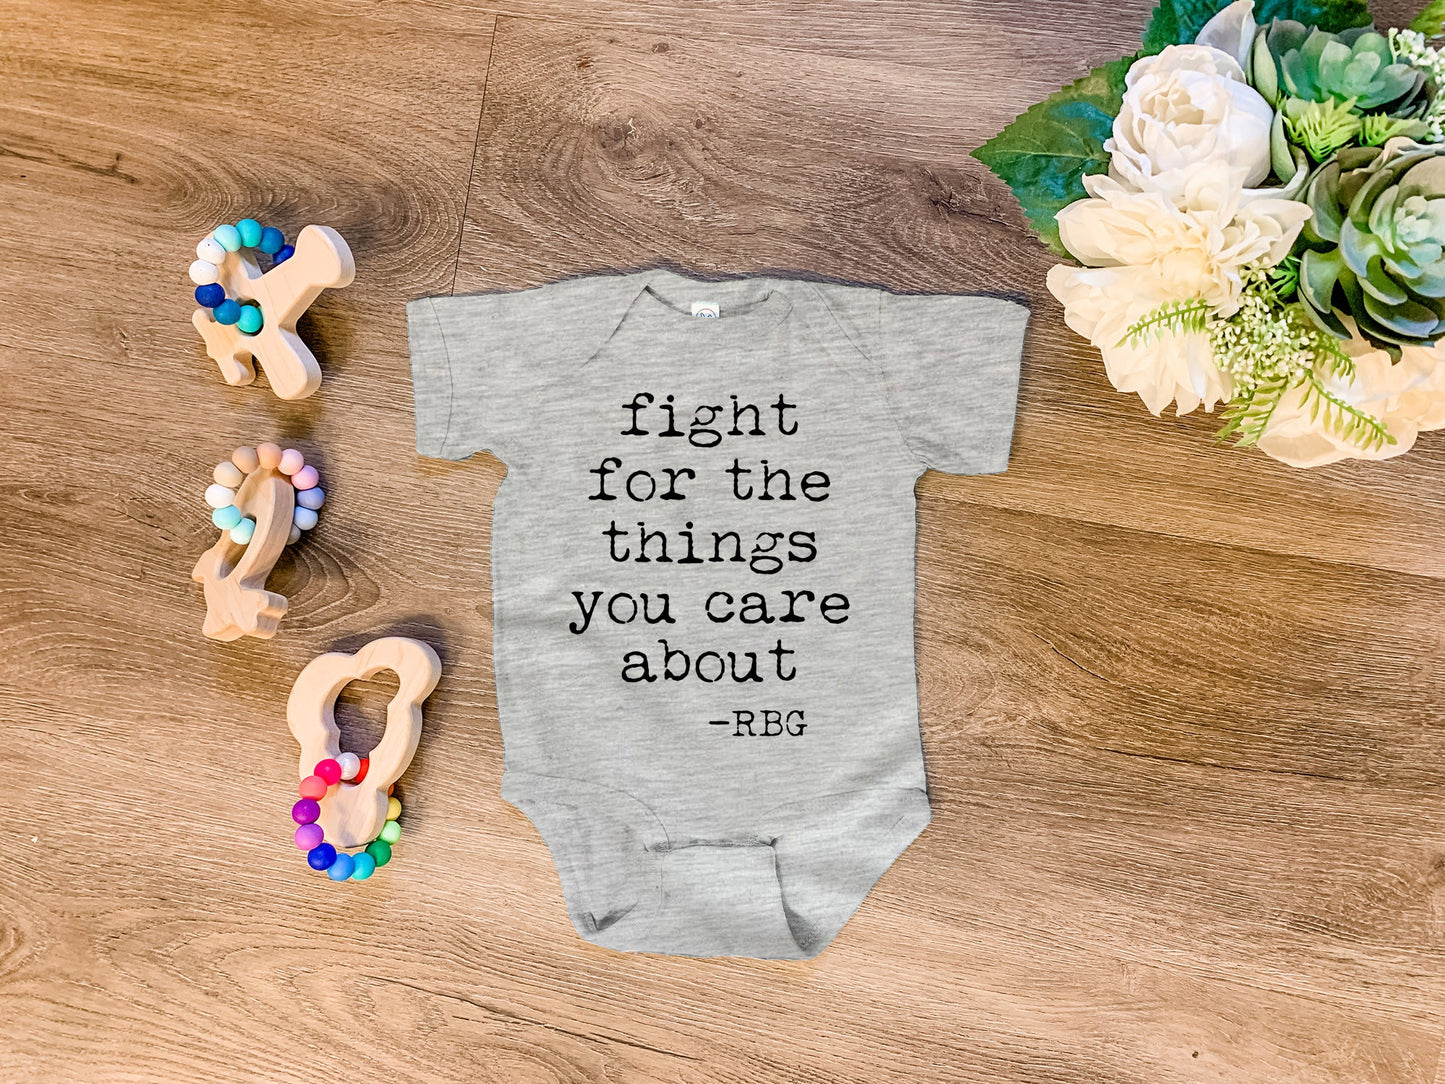 Fight Quote RBG (Ruth Bader Ginsburg) - Onesie - Heather Gray, Chill, or Lavender